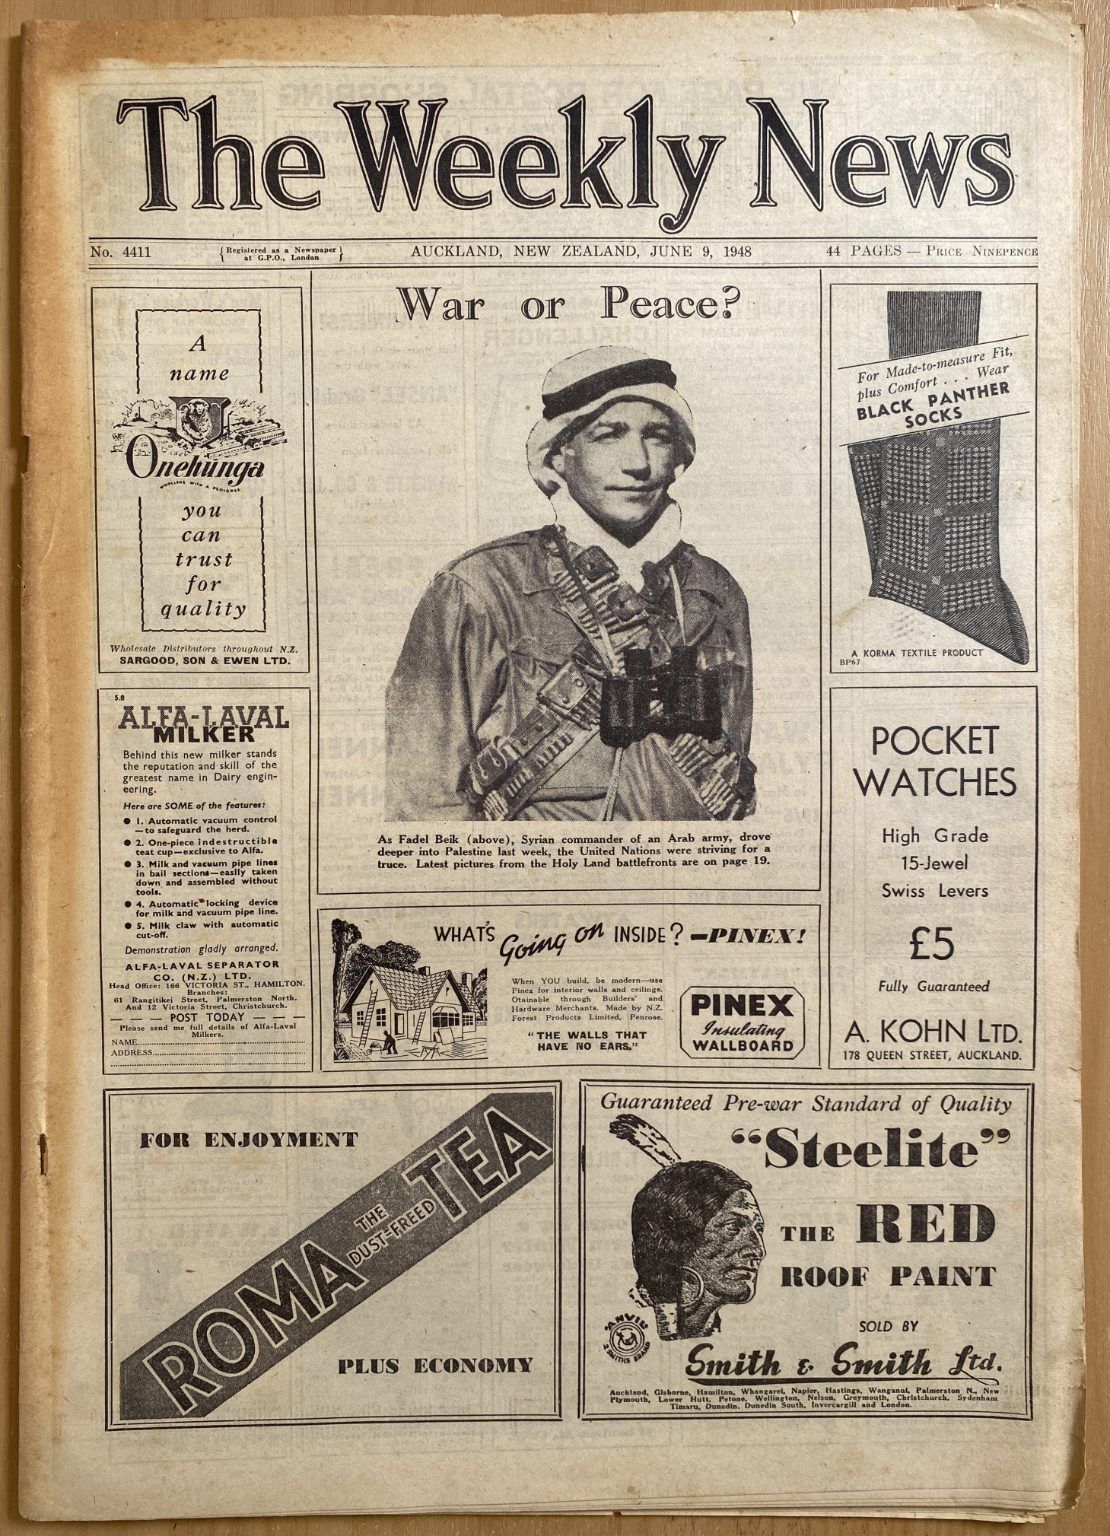 OLD NEWSPAPER: The Weekly News - No. 4411, 9 June 1948